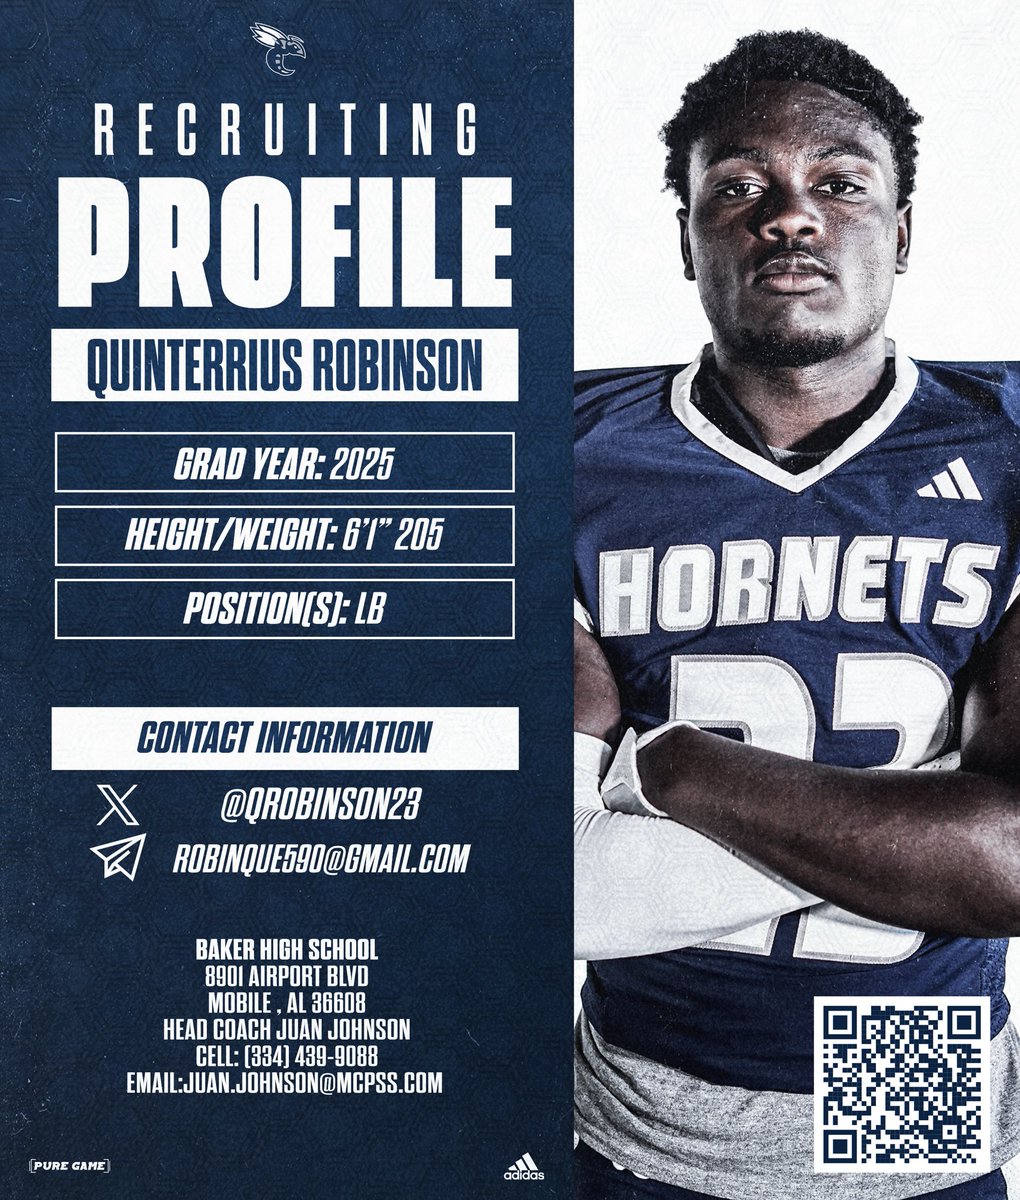 2025s Recruiting Spotlight Come Here , Go Anywhere Quinterrius Robinson •LB | @QRobinson23 12 Days until Spring Football starts! Coaches come check us out 8901 Airport Blvd #BakerMade #SWARM